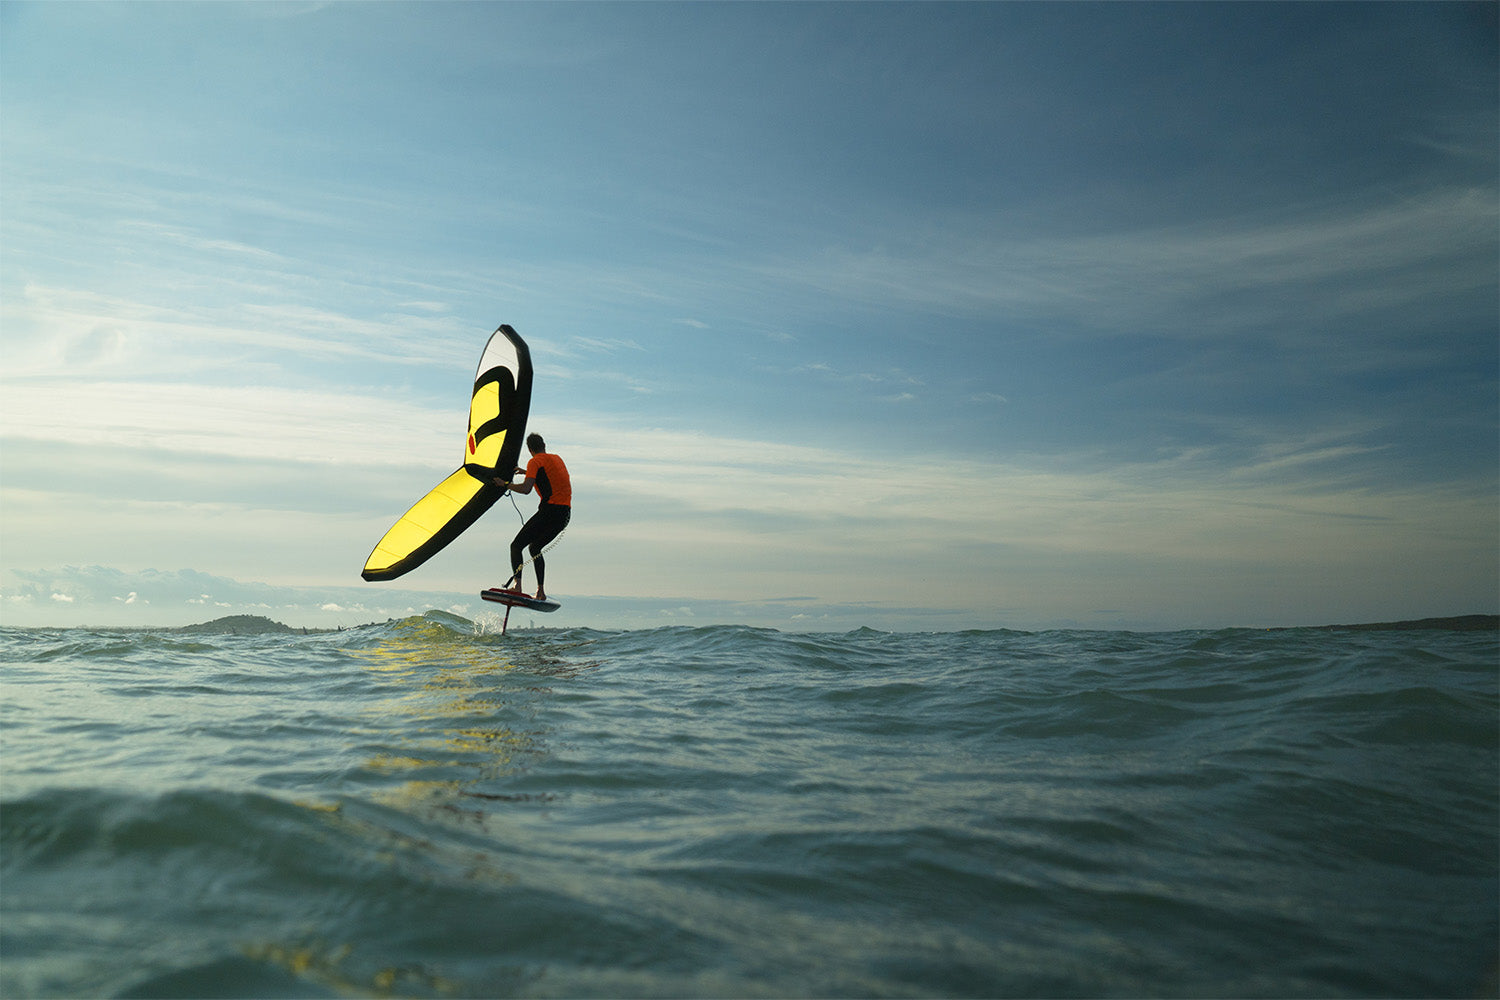 Foil Surfing: What Is It & Should You Try It?